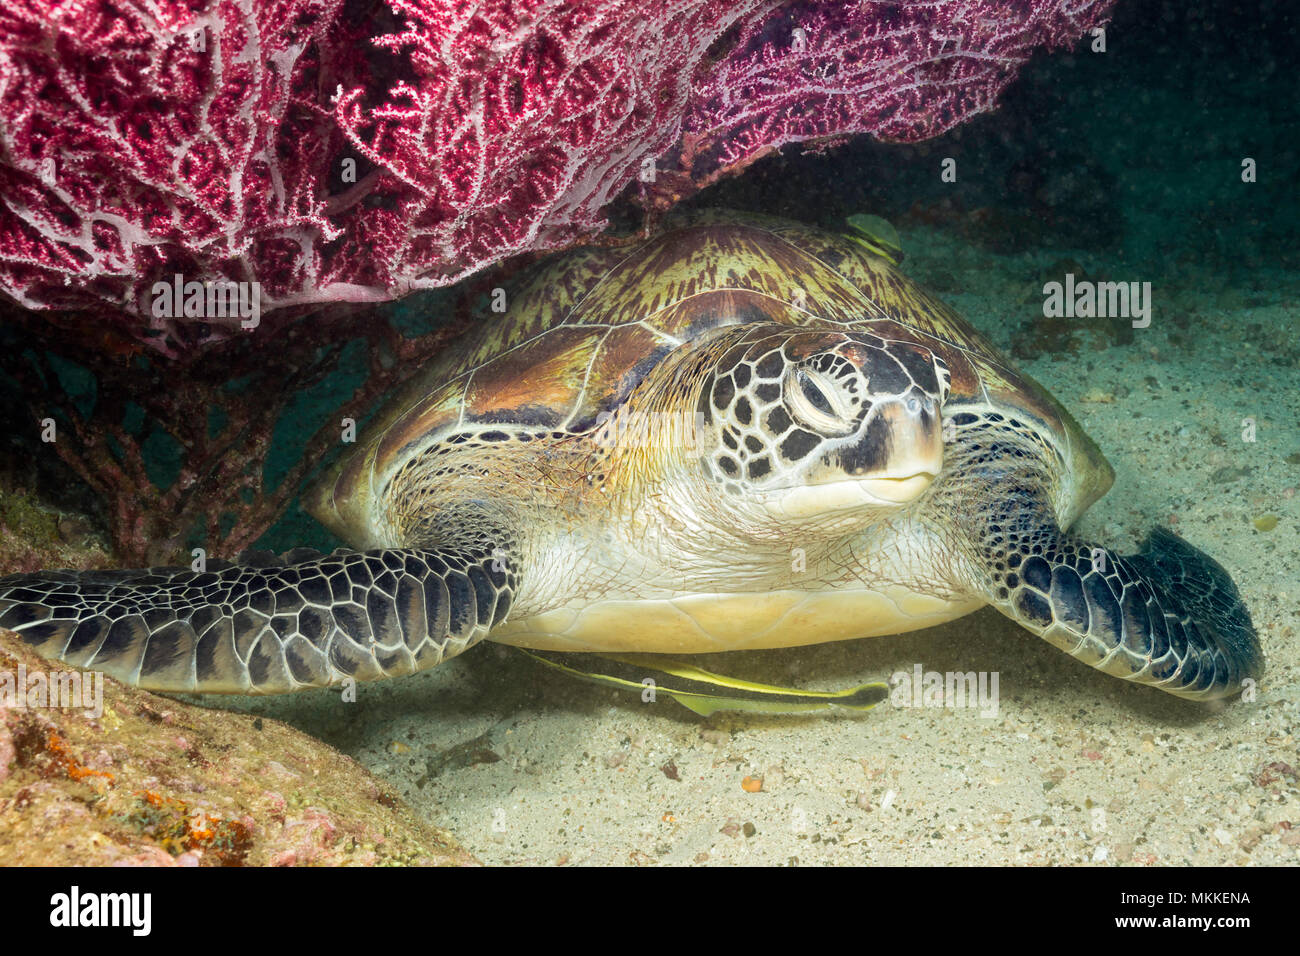 An endangered species, this green sea turtle, Chelonia mydas, is resting under a fan of gorgonian coral along with two remora, Philippines. Stock Photo